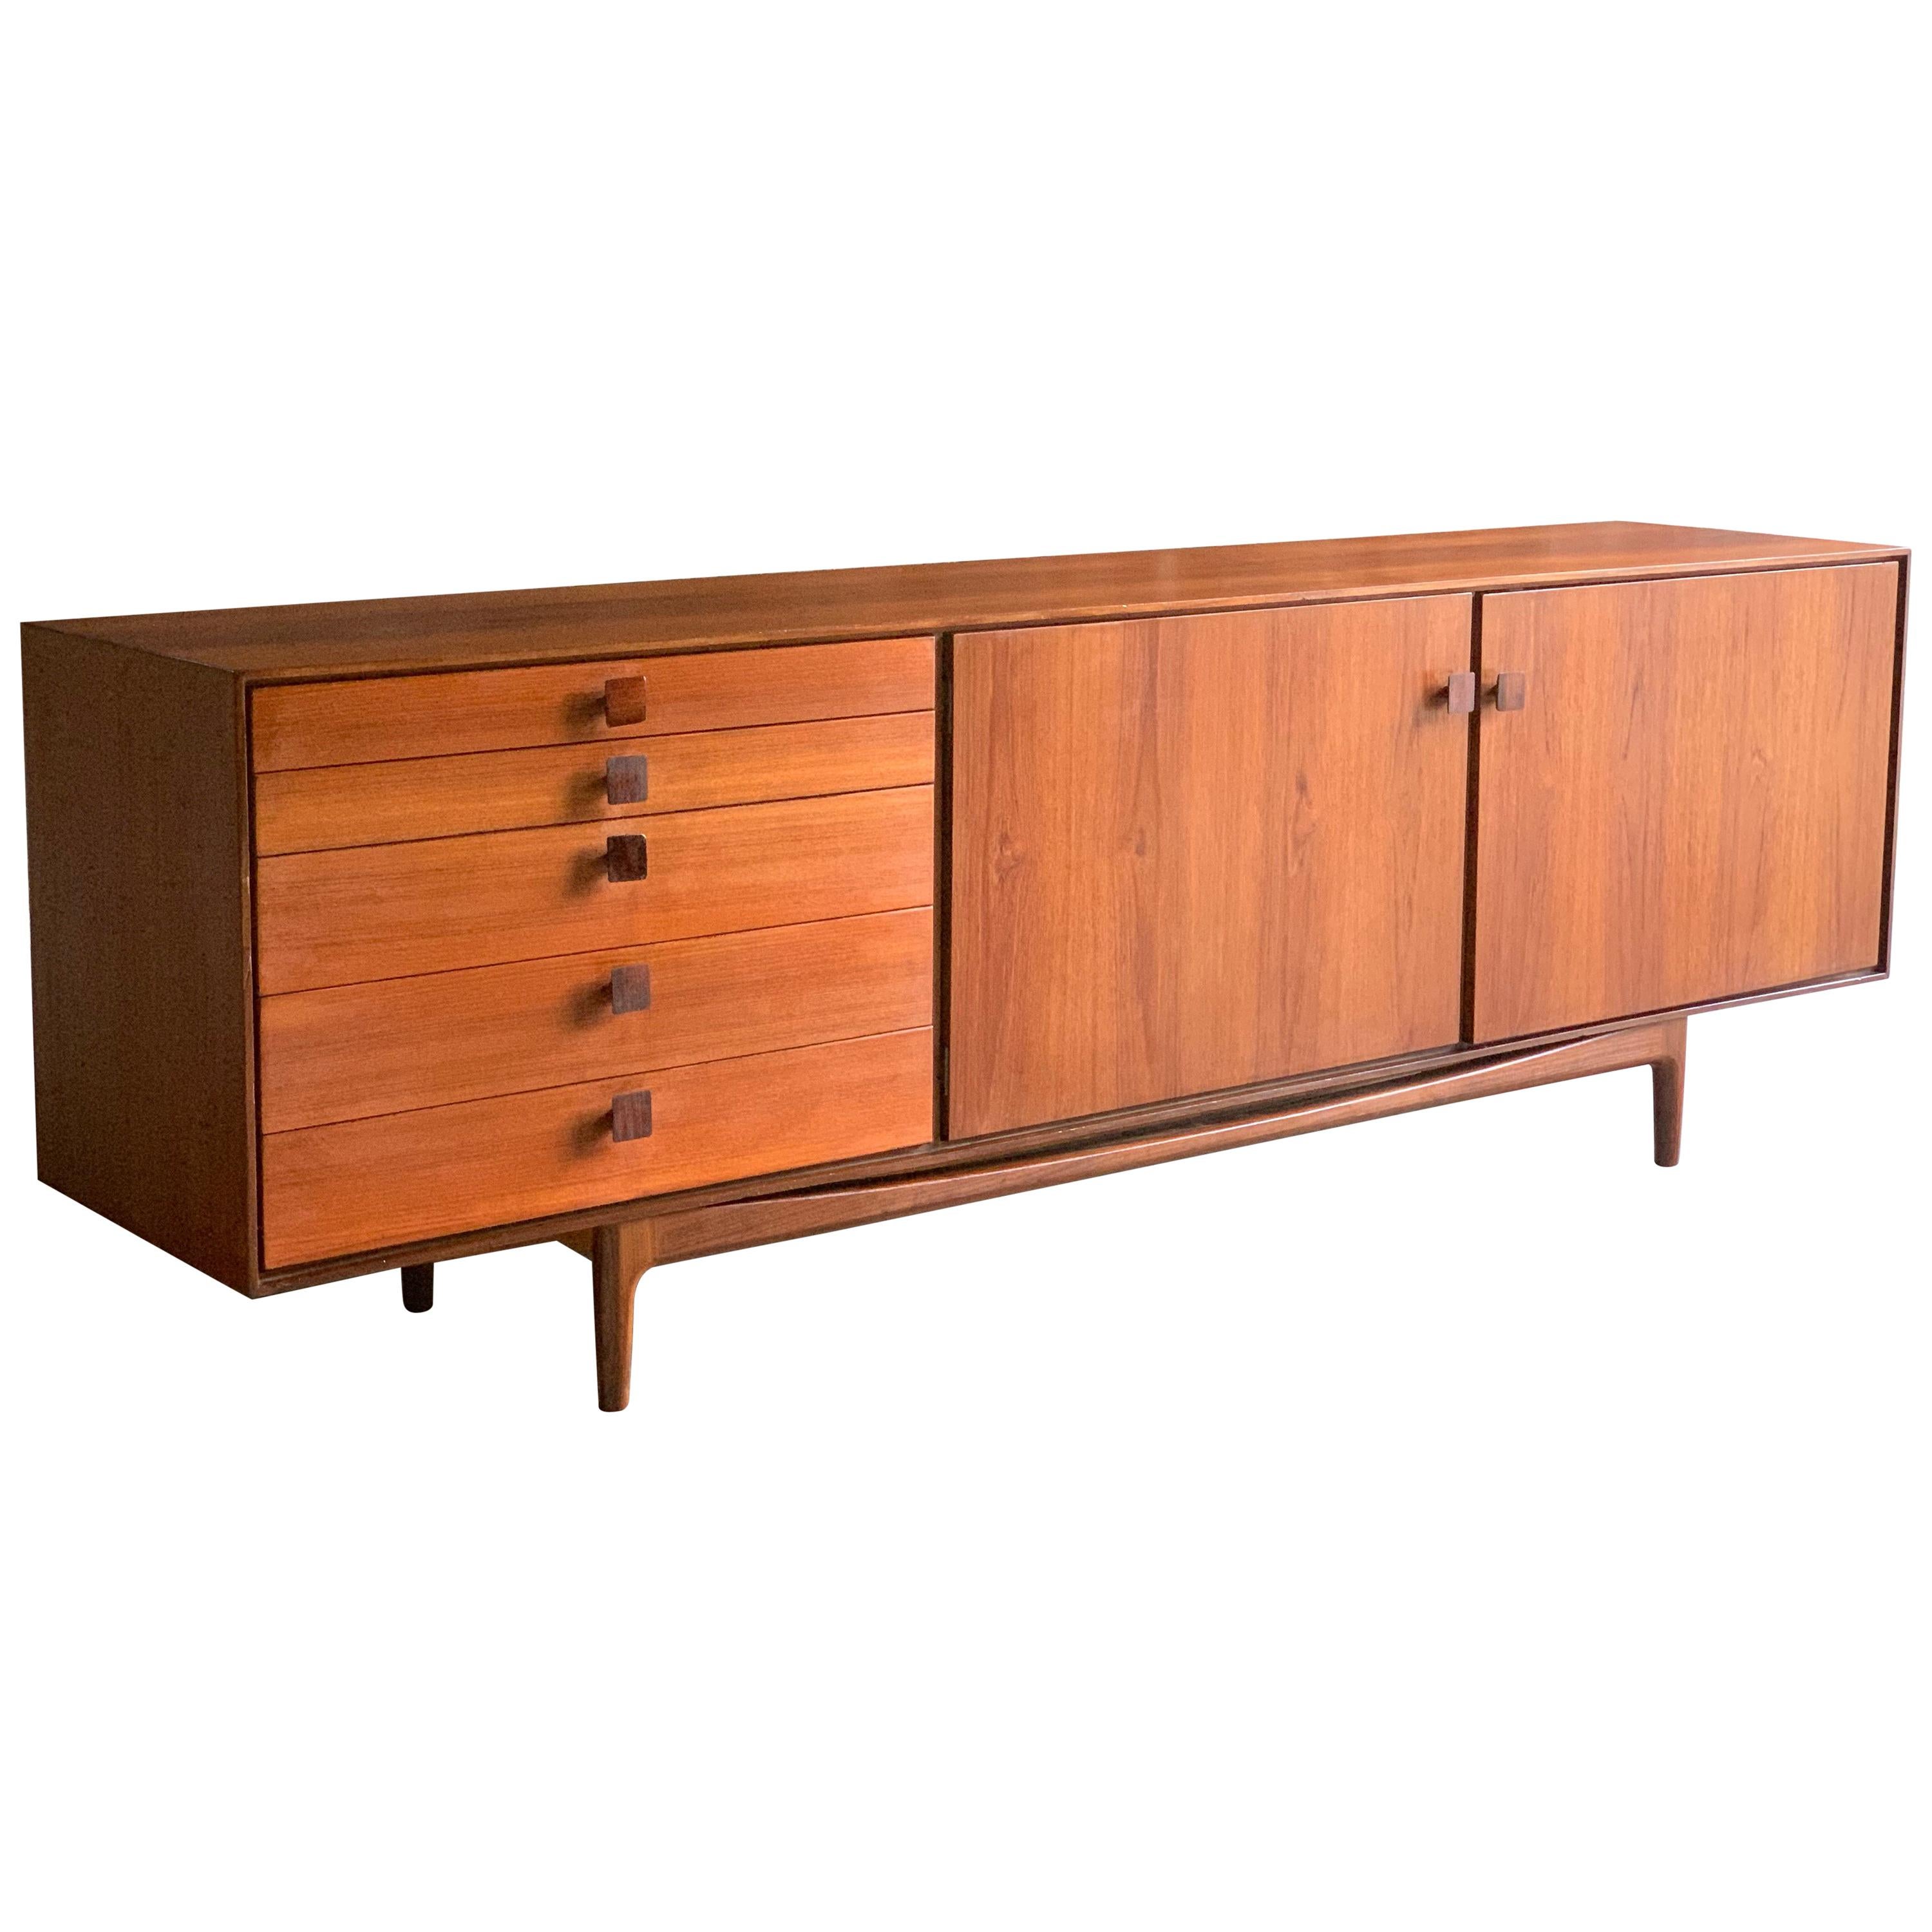 Ib Kofod-Larsen African teak sideboard manufactured in the UK for G-Plan in the 1960s

Magnificent midcentury Danish design sideboard credenza designed by Ib Kofod-Larsen, and manufactured by G-Plan circa 1960s, produced from African teak and